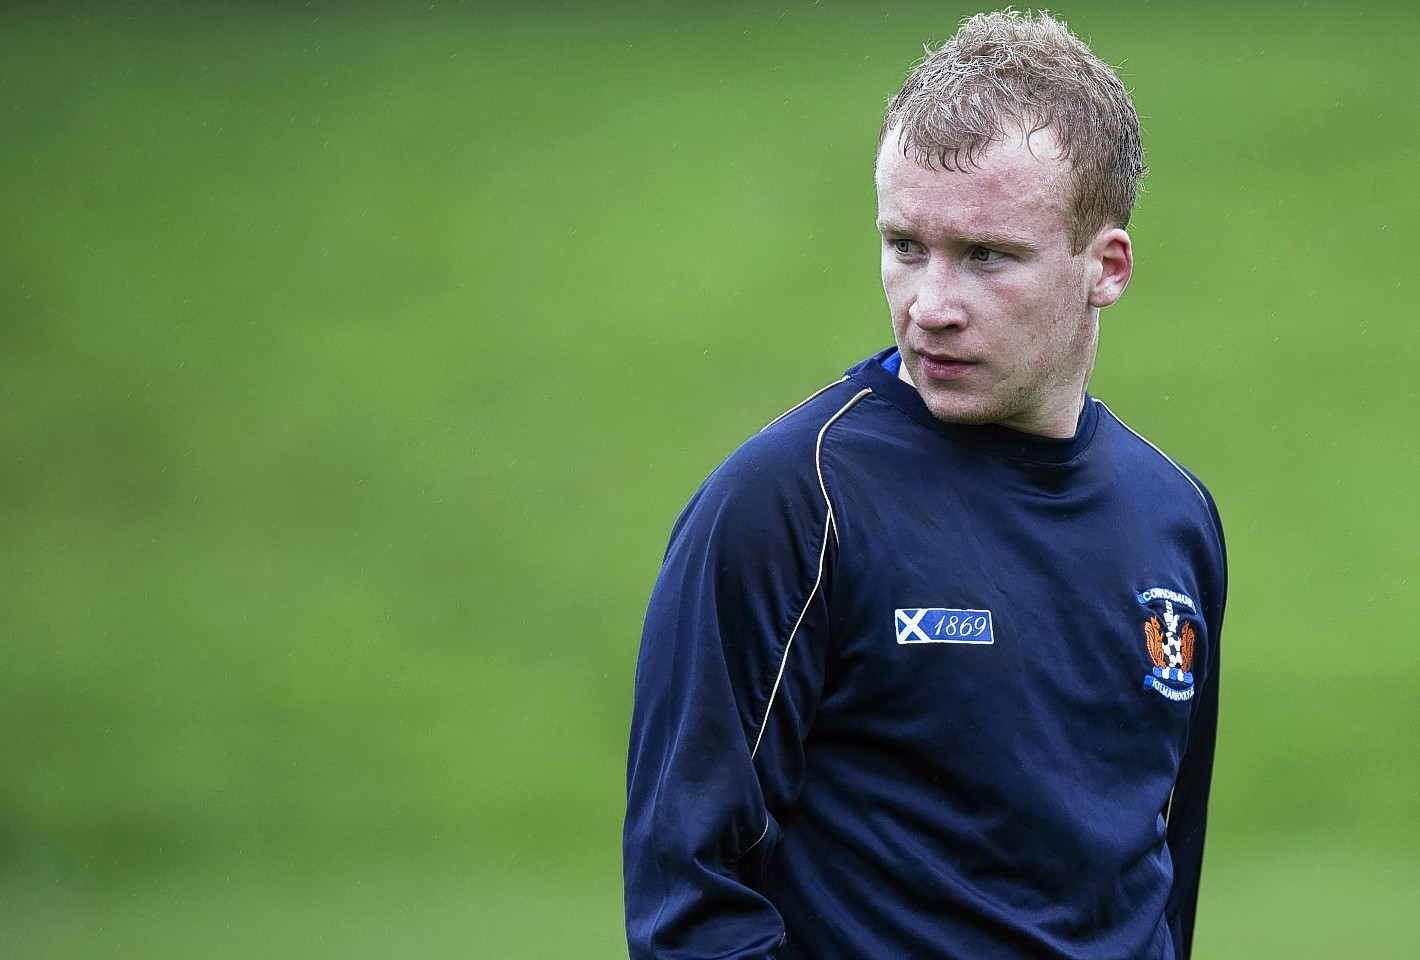 New Ross County signing Liam Boyce